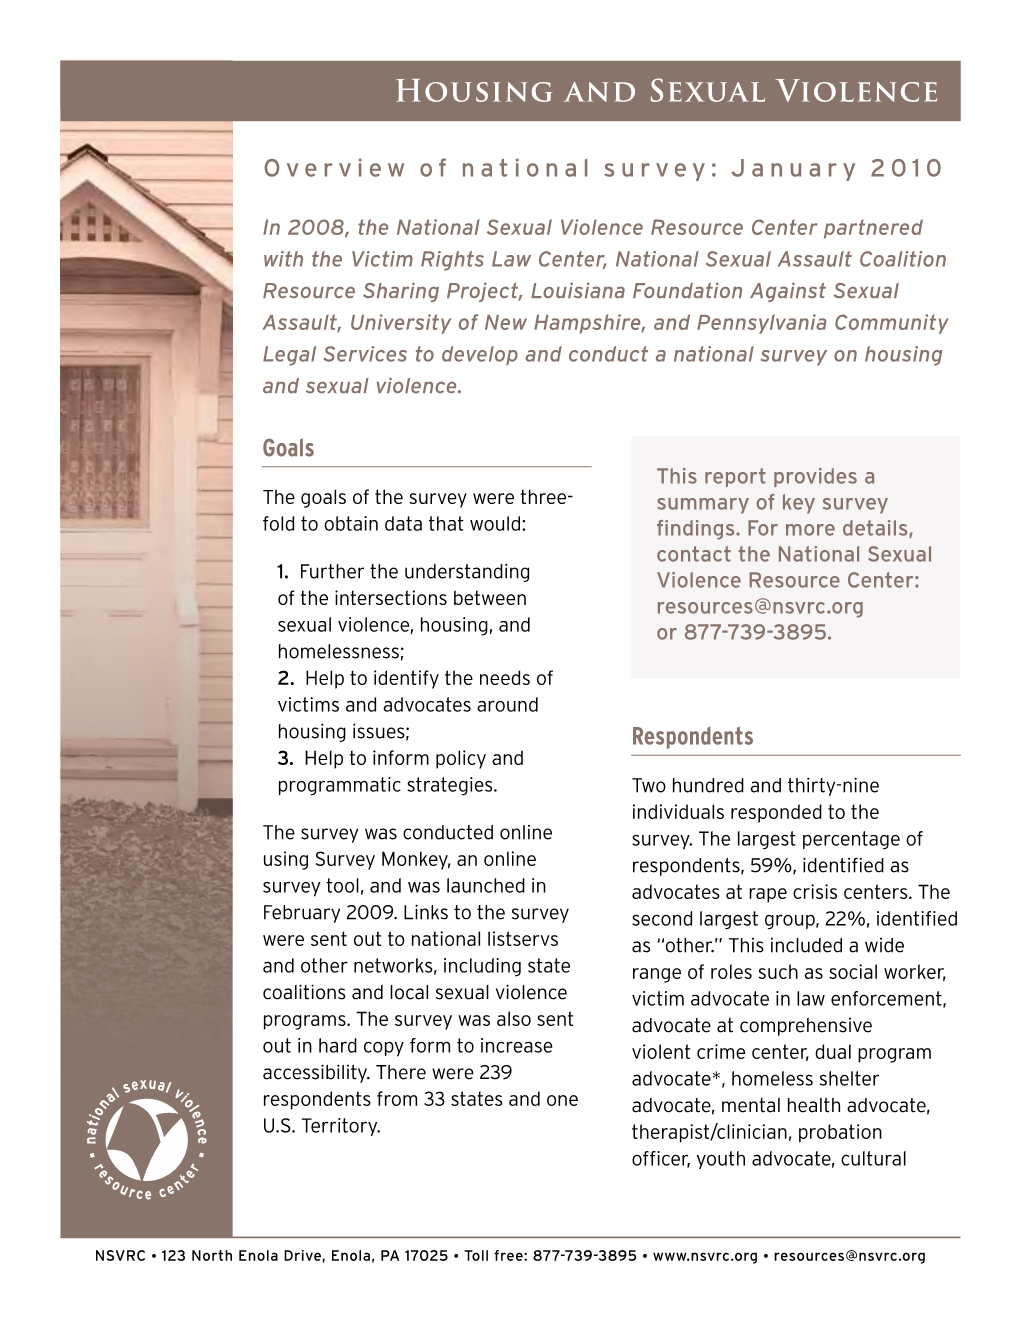 NSVRC Housing and Sexual Violence Overview of National Survey